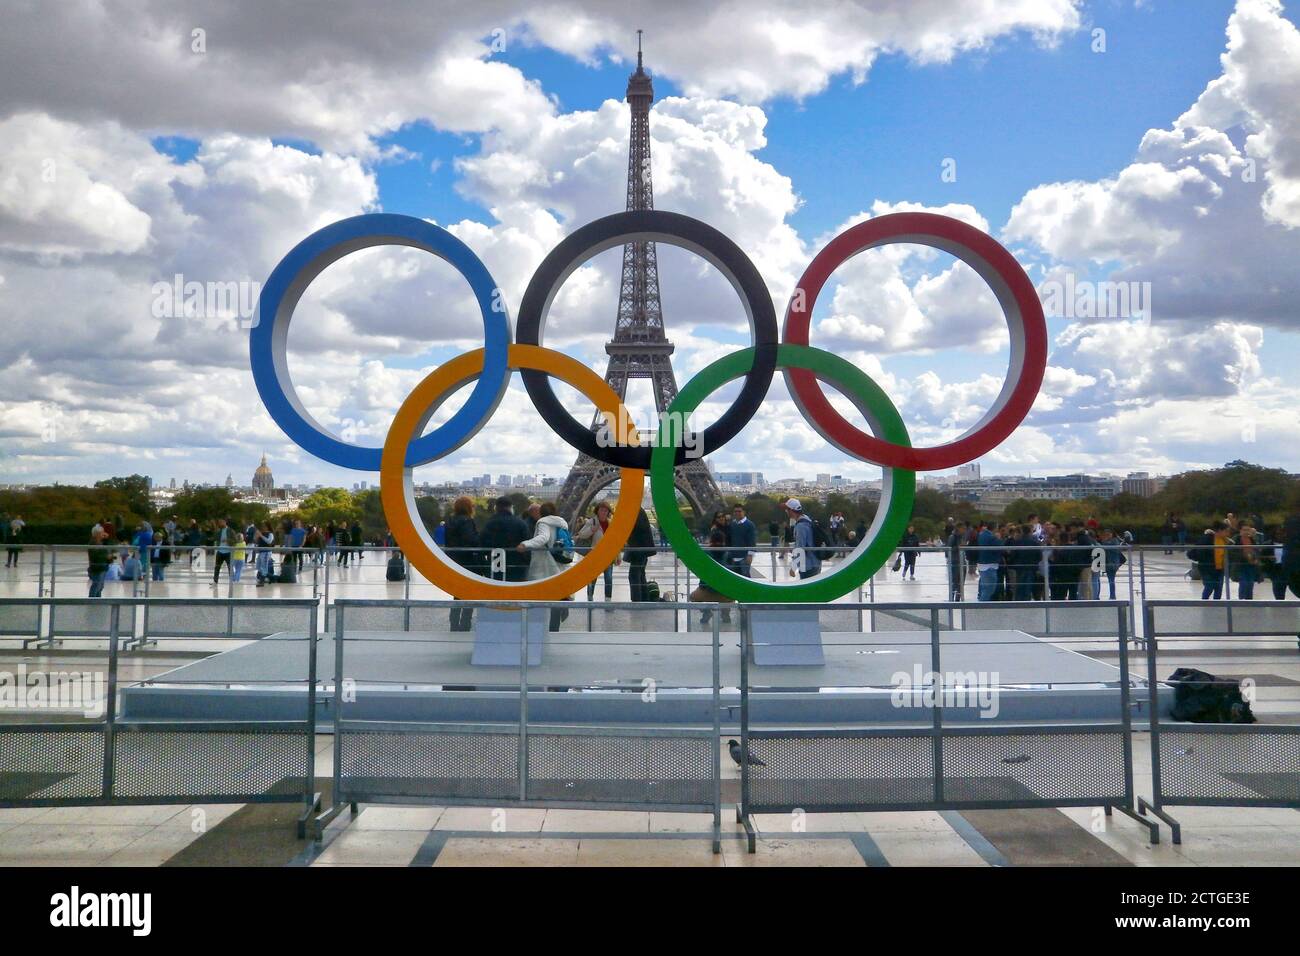 Paris, France - September 15 2017: Olympic rings installed on the esplanade of Trocadero to commemorate the Olympic Games which will take place in Par Stock Photo